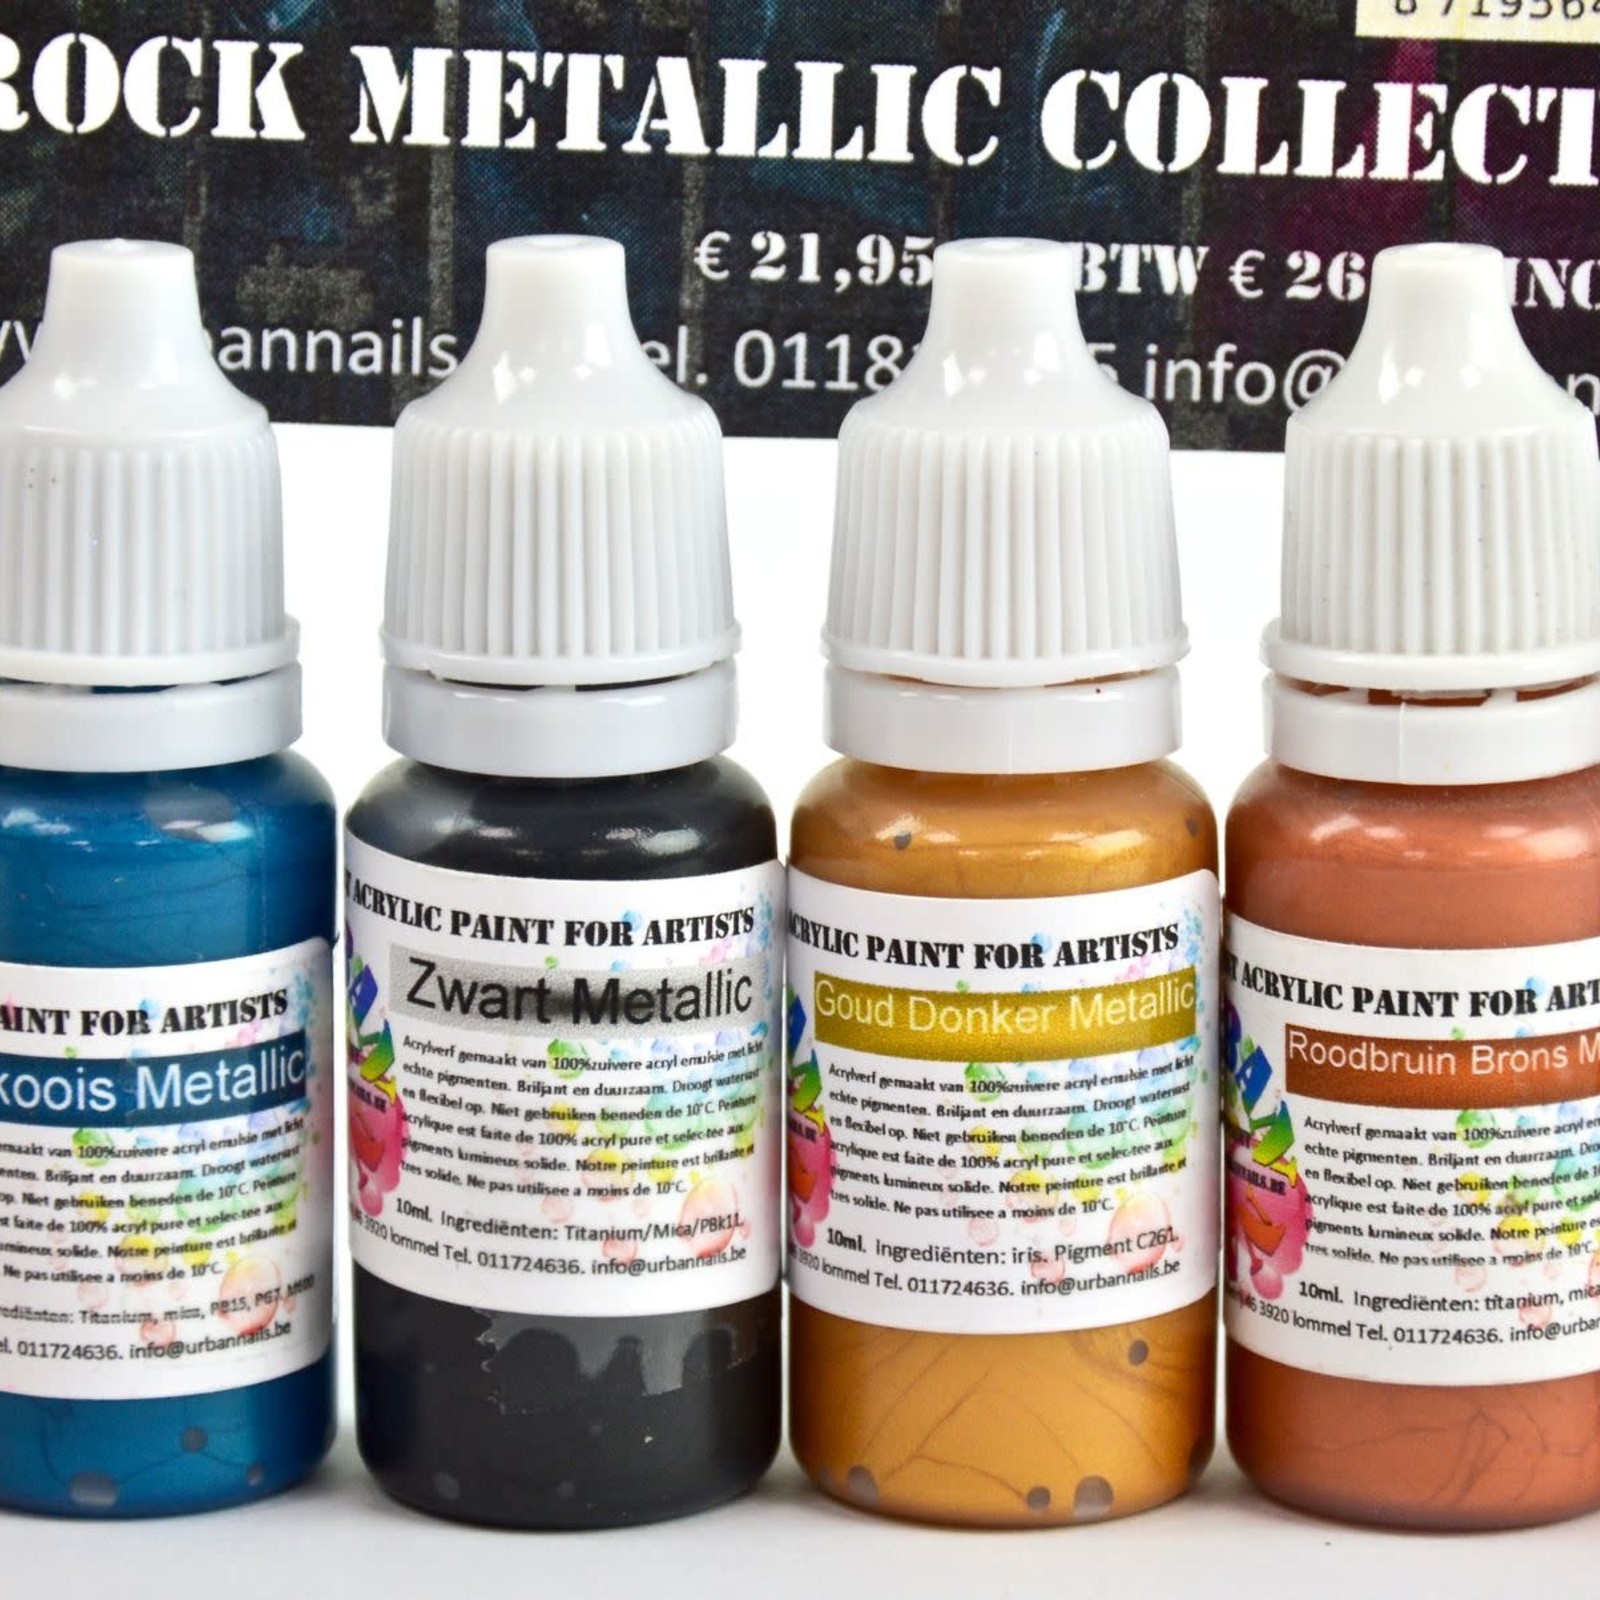 Urban nails Pure Paint Collection Rock Metallic